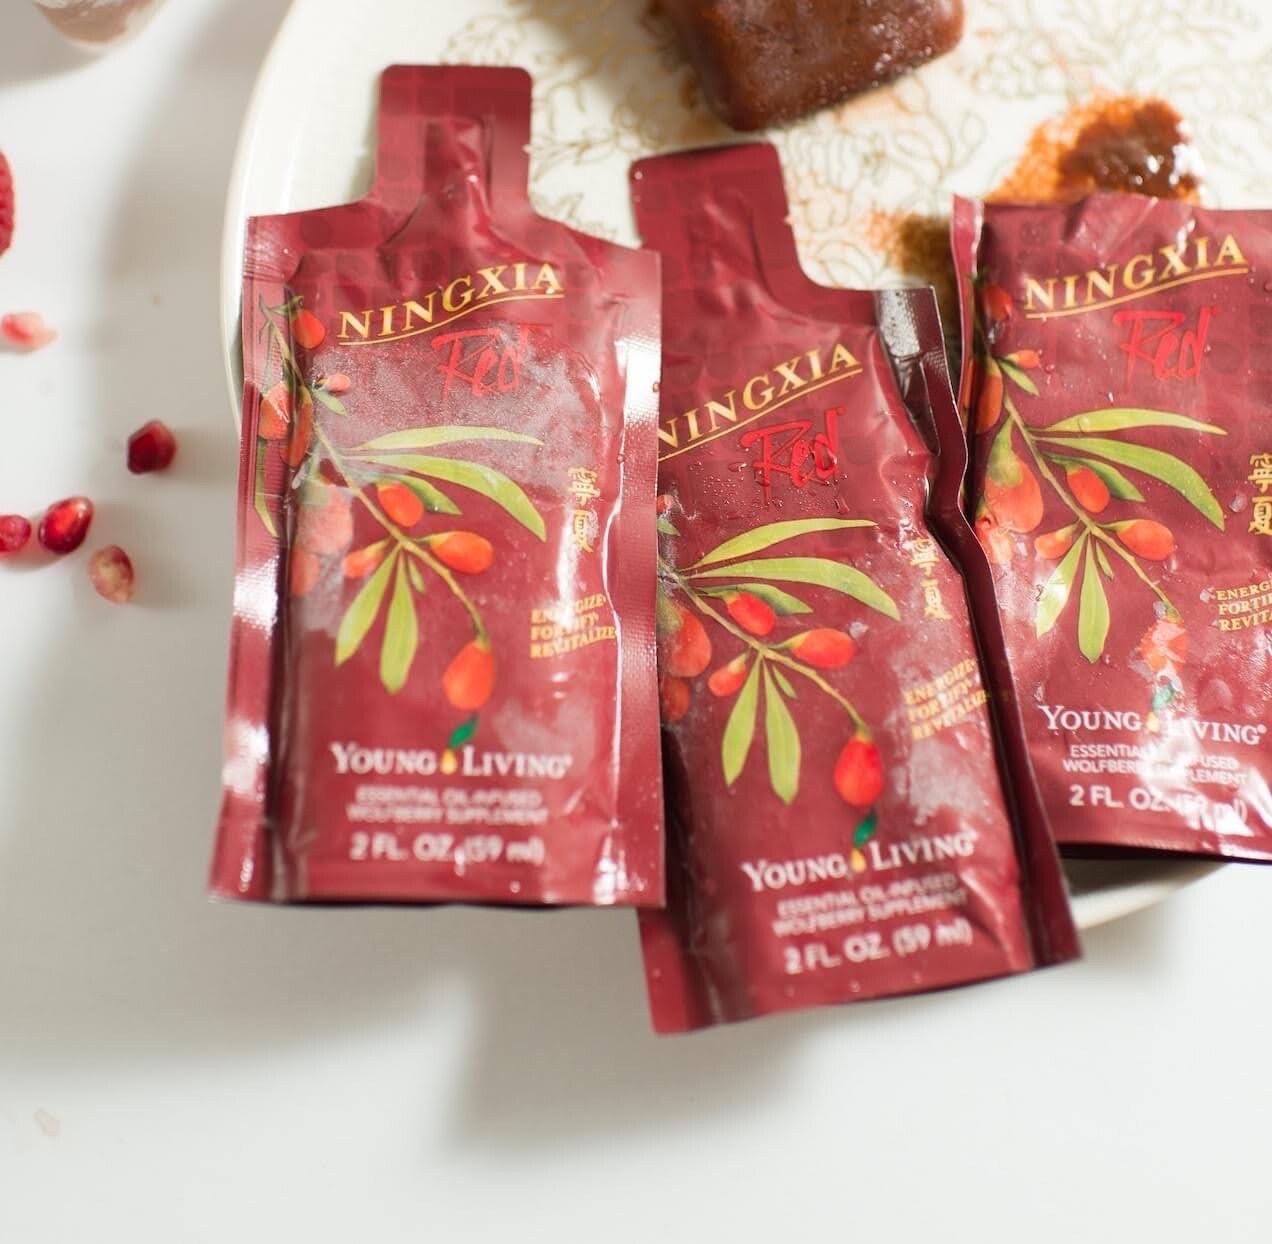 The Superfood Ningxia Red